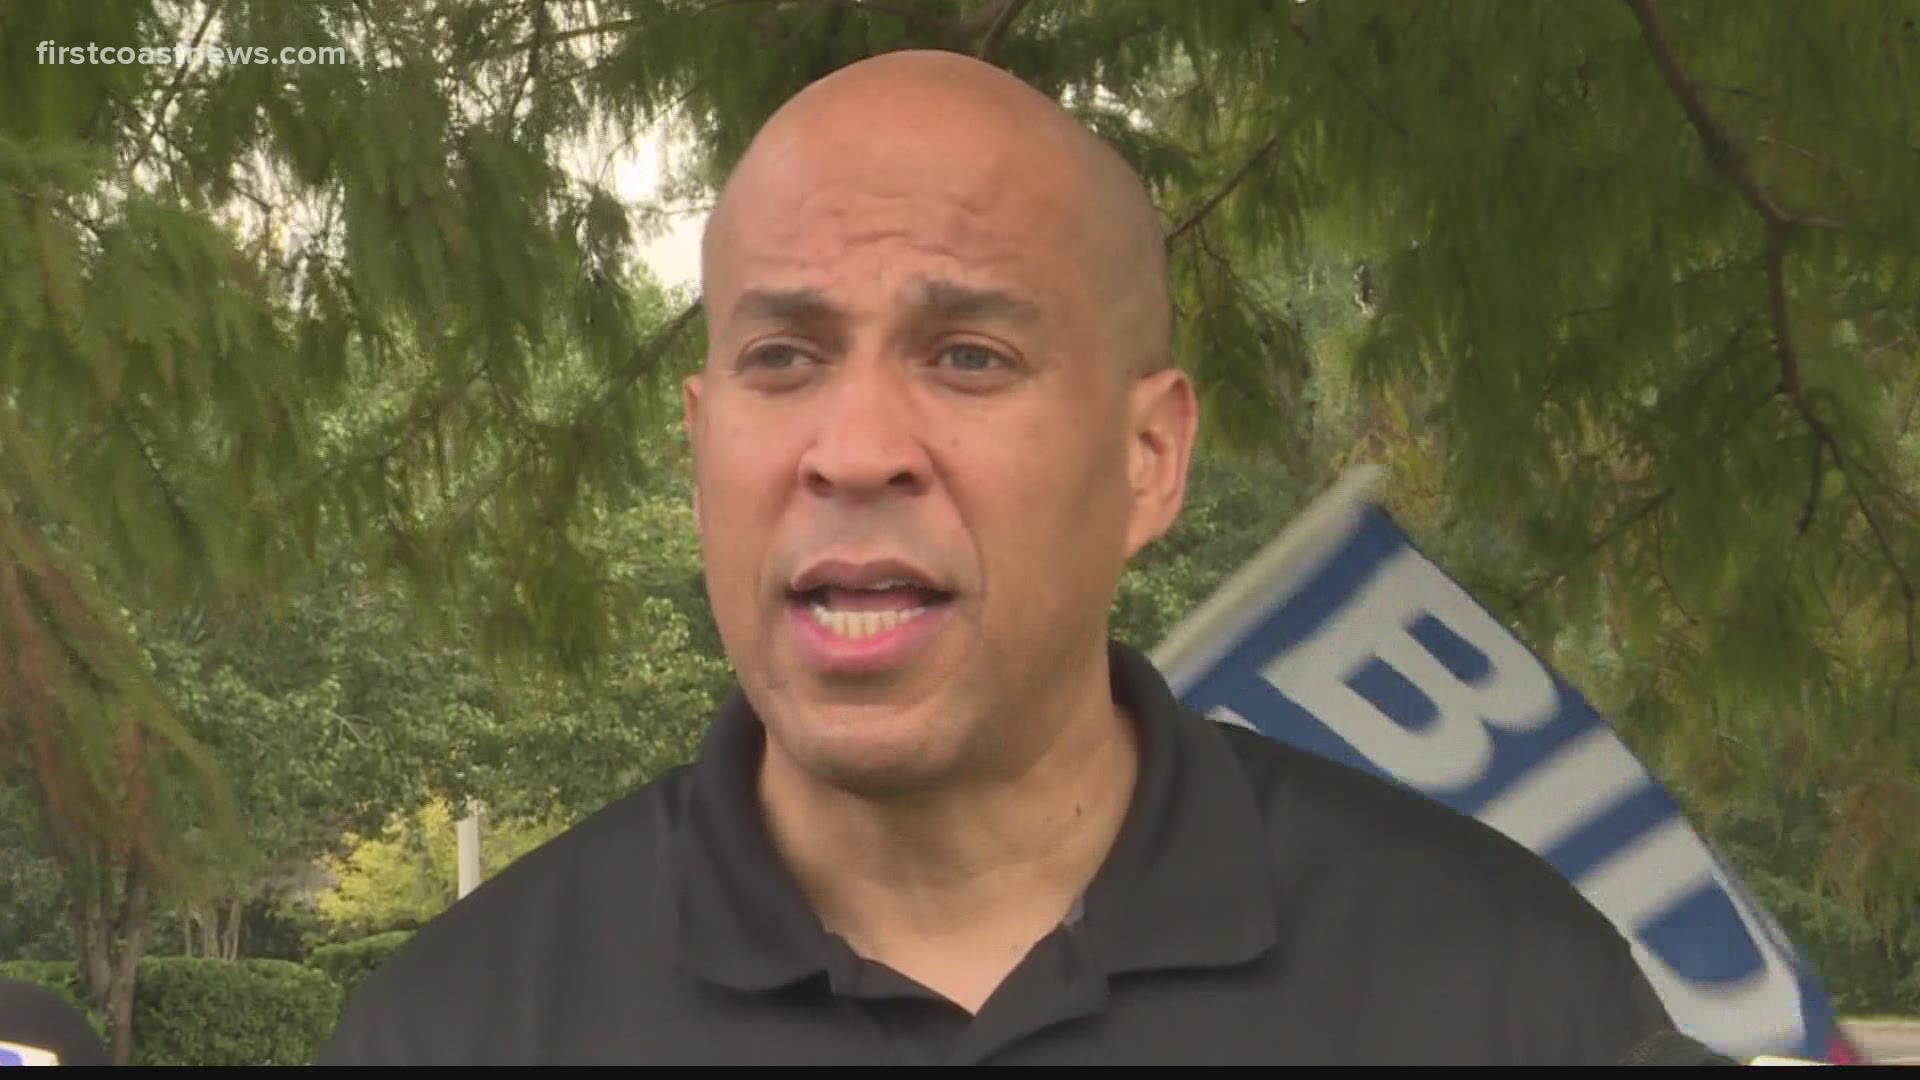 Senator Cory Booker stopped at an early voting site at a Get Out the Vote event.